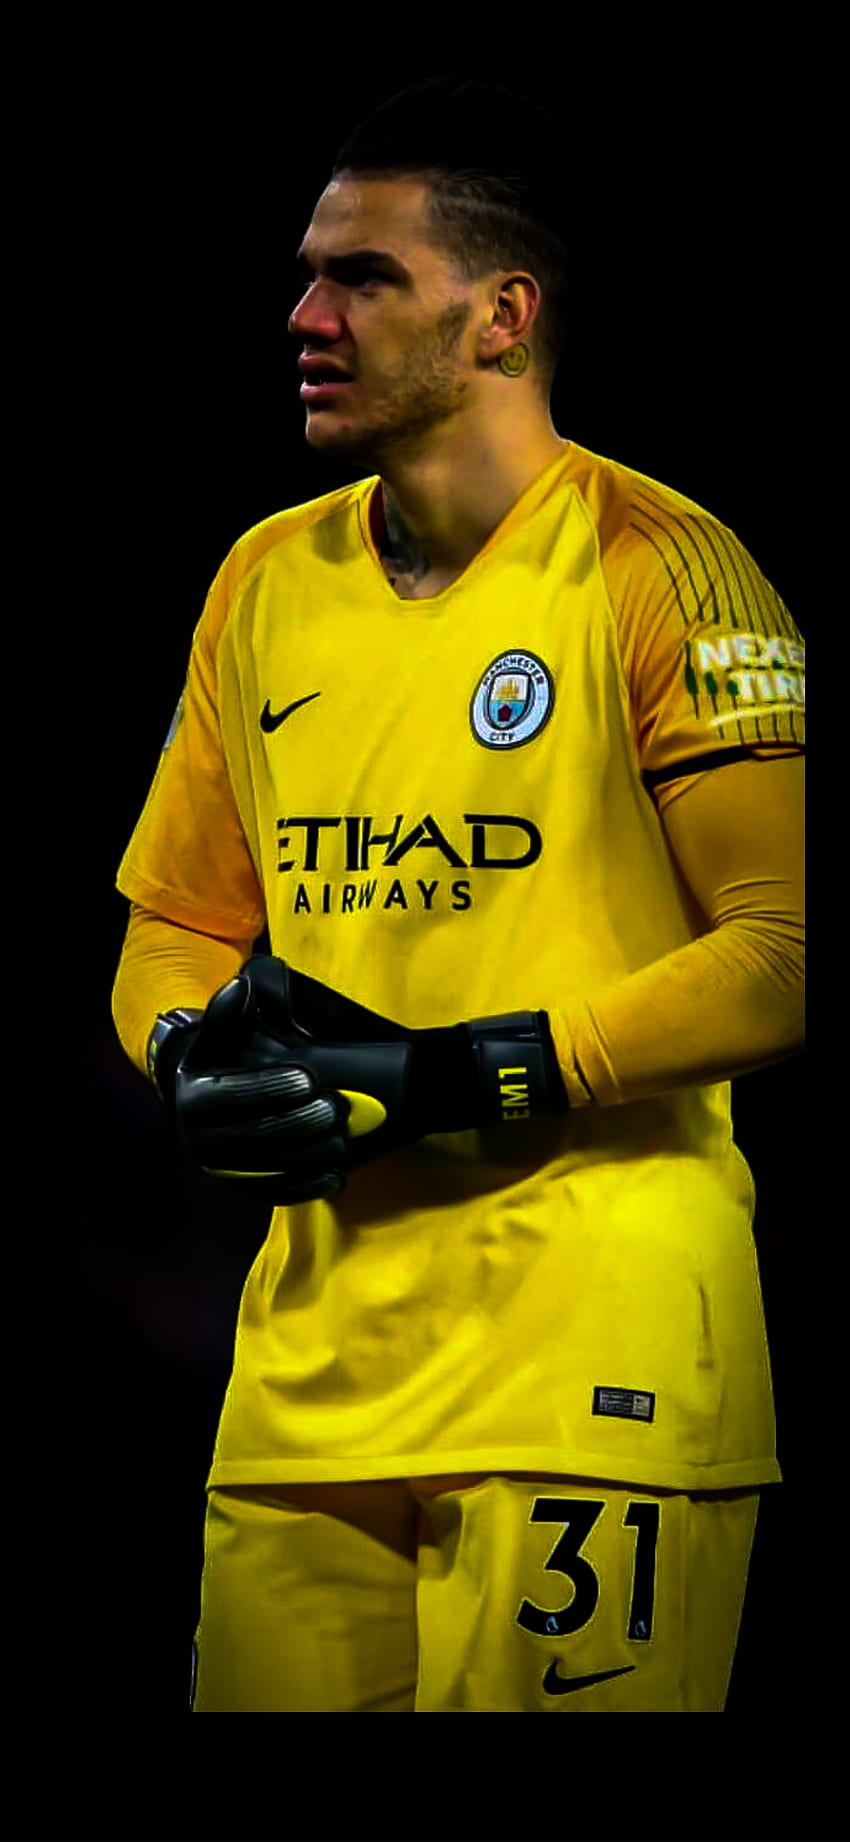 Ederson wallpaper by supermts1  Download on ZEDGE  be6f